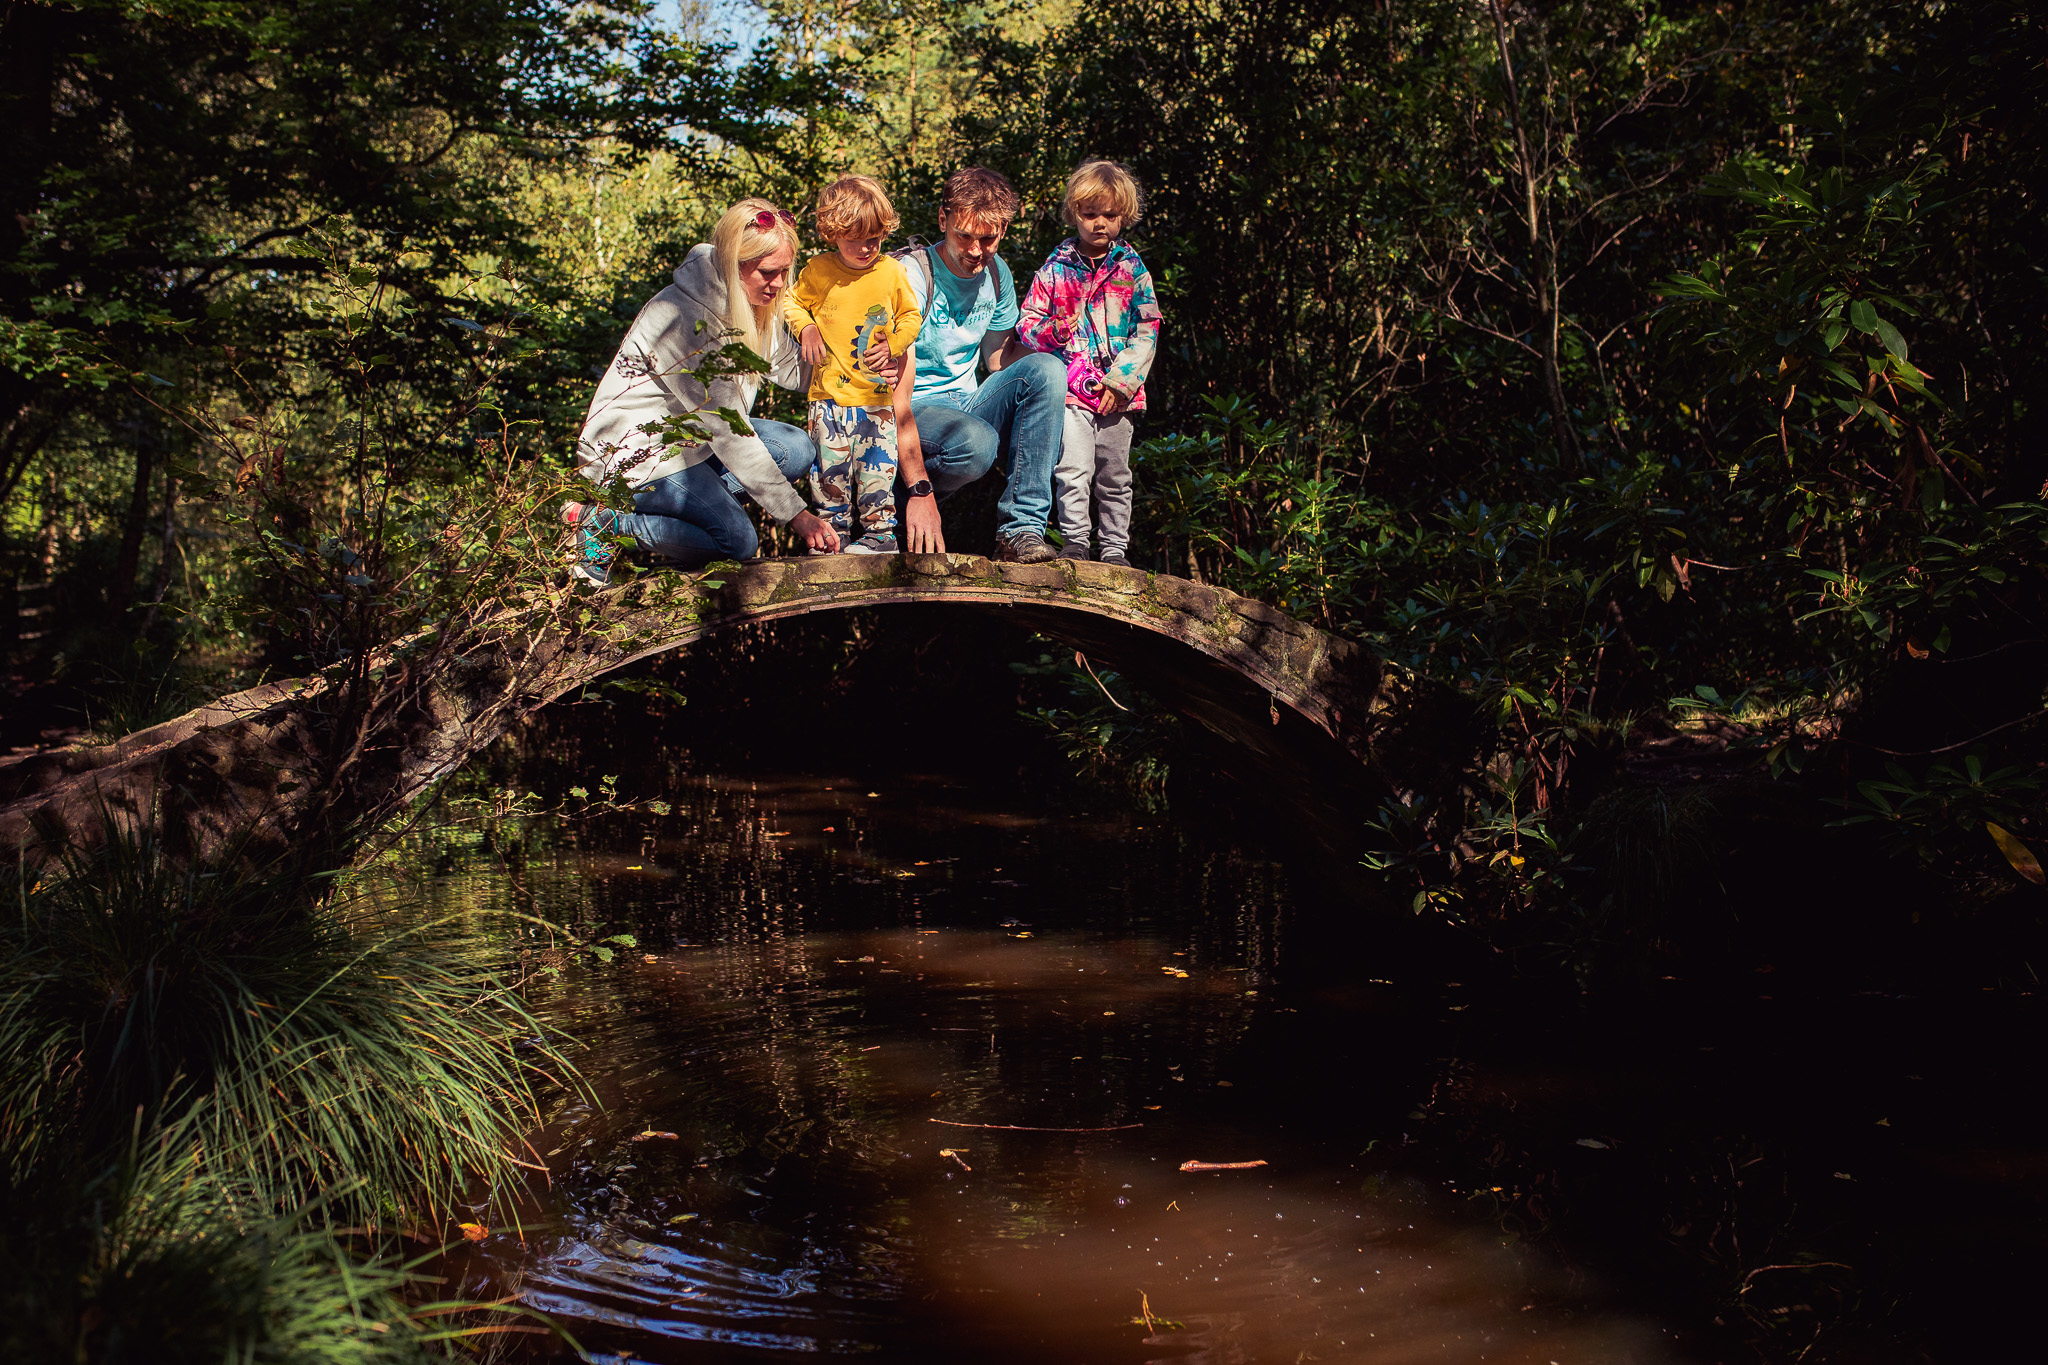 Mum, dad, and two sons are standing on a small stone bridge, looking over into the water during a family photo session.